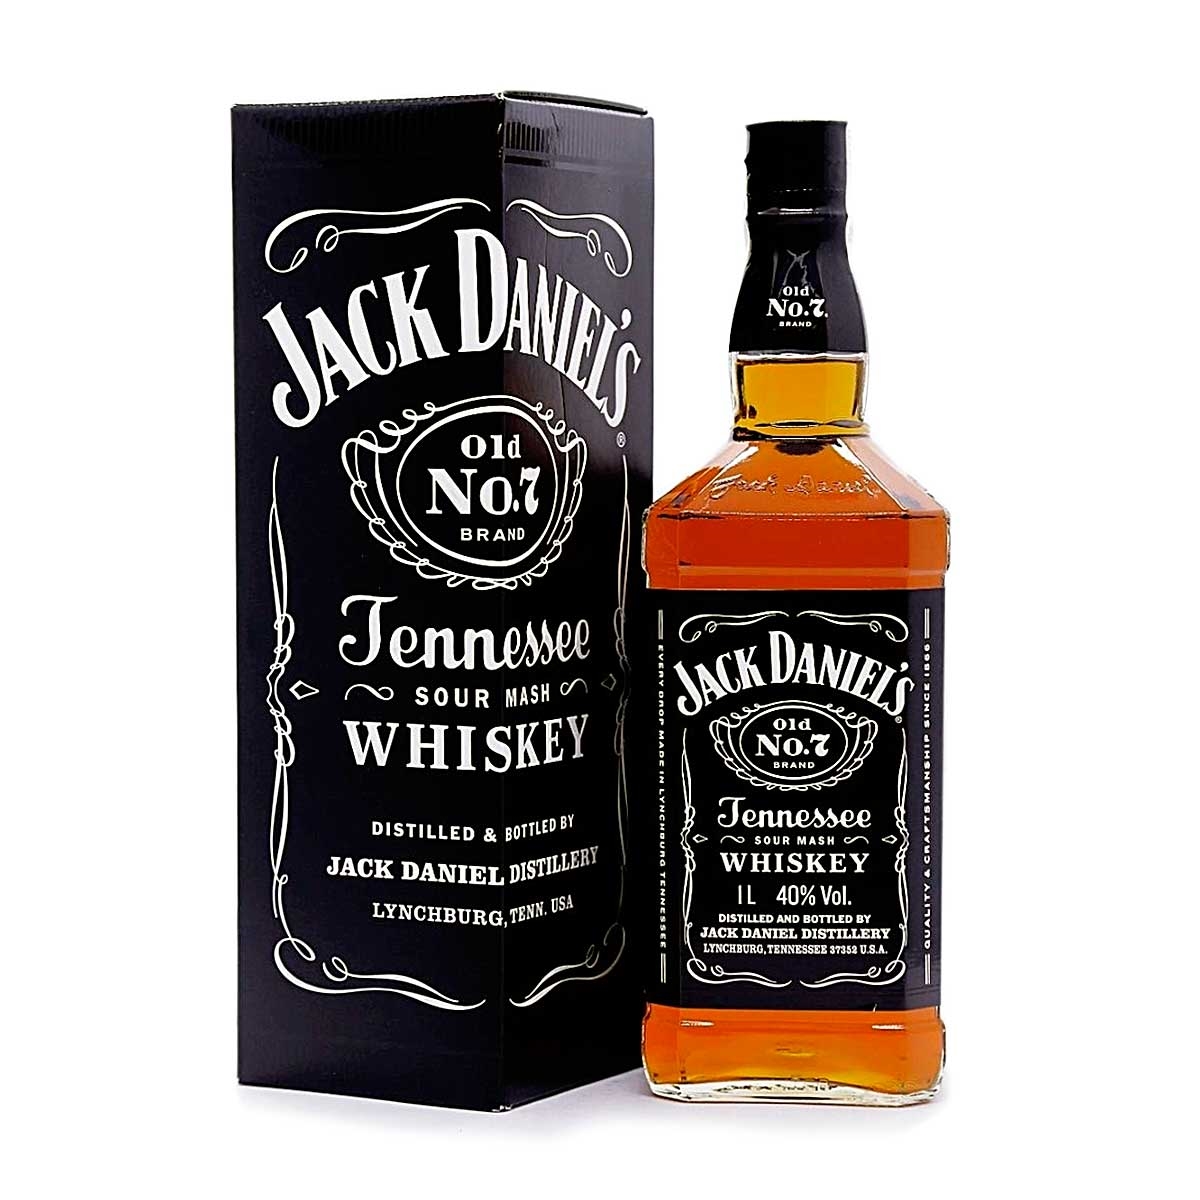 whisky-jack-daniel-s-old-n-7-tennessee-com-cartucho-1000ml